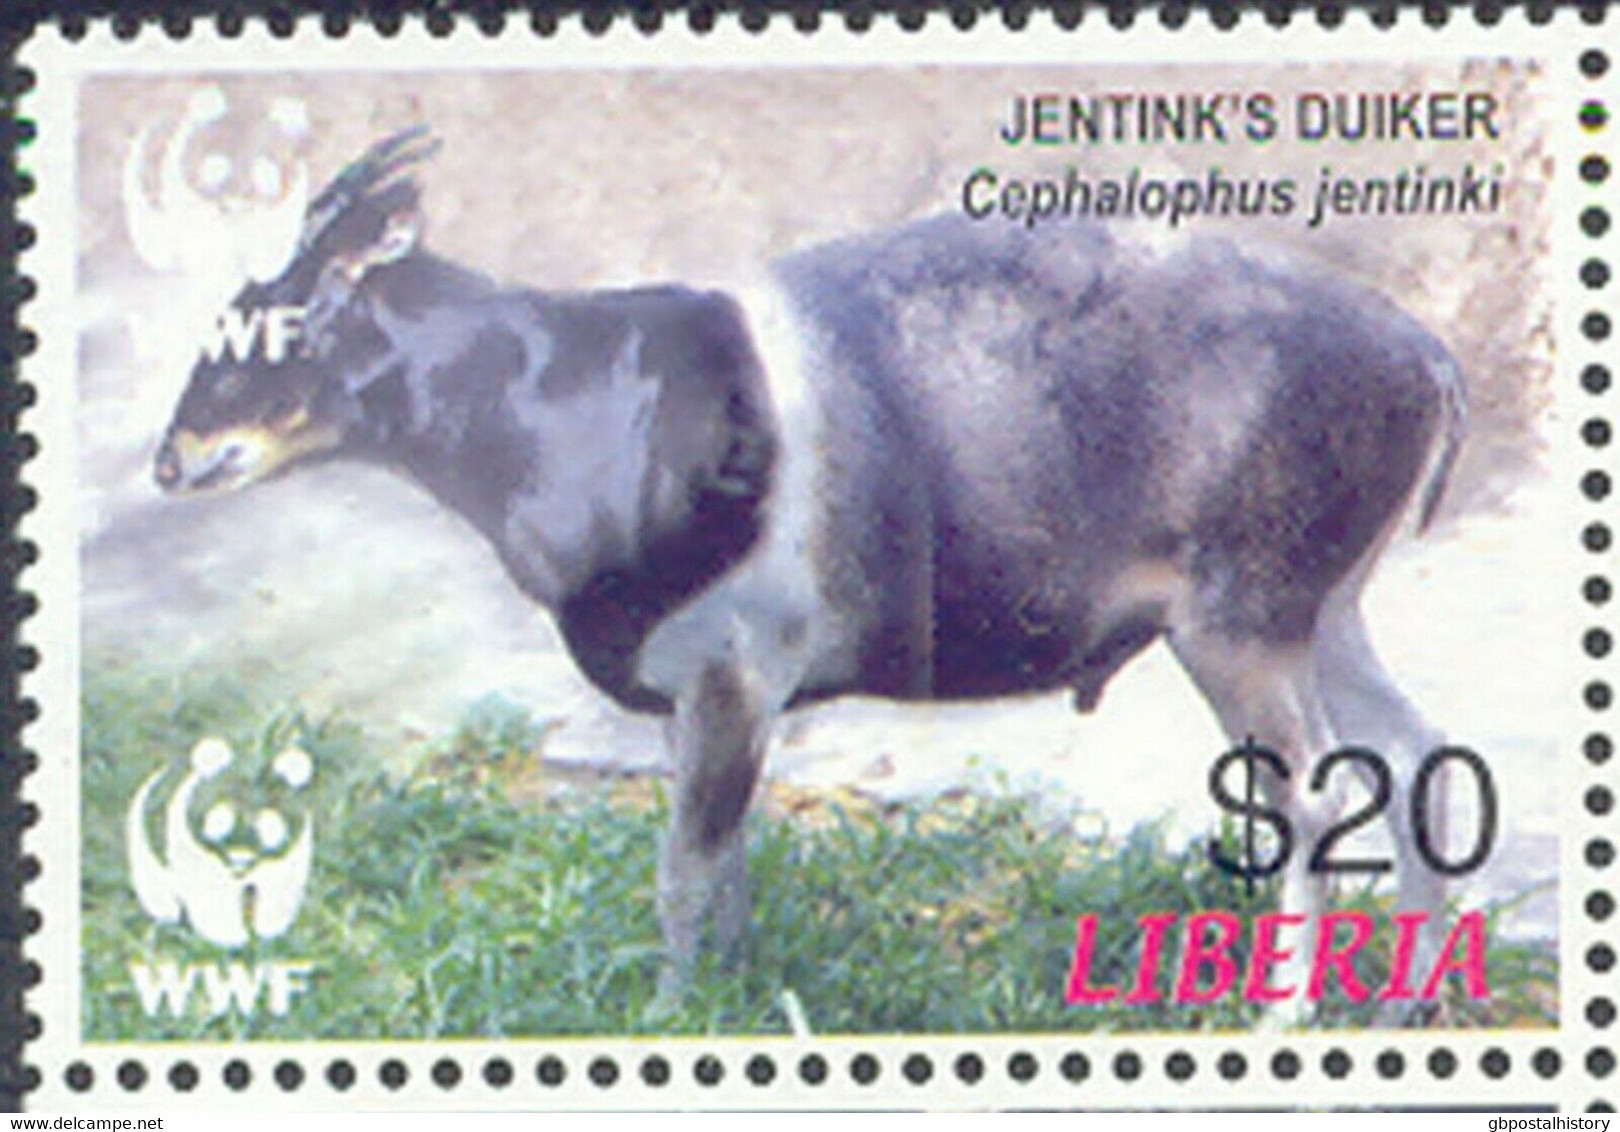 LIBERIA 2005 World Wide Fund For Nature (WWF), Jentink's Duiker ** DOUBLE PRINT - Liberia